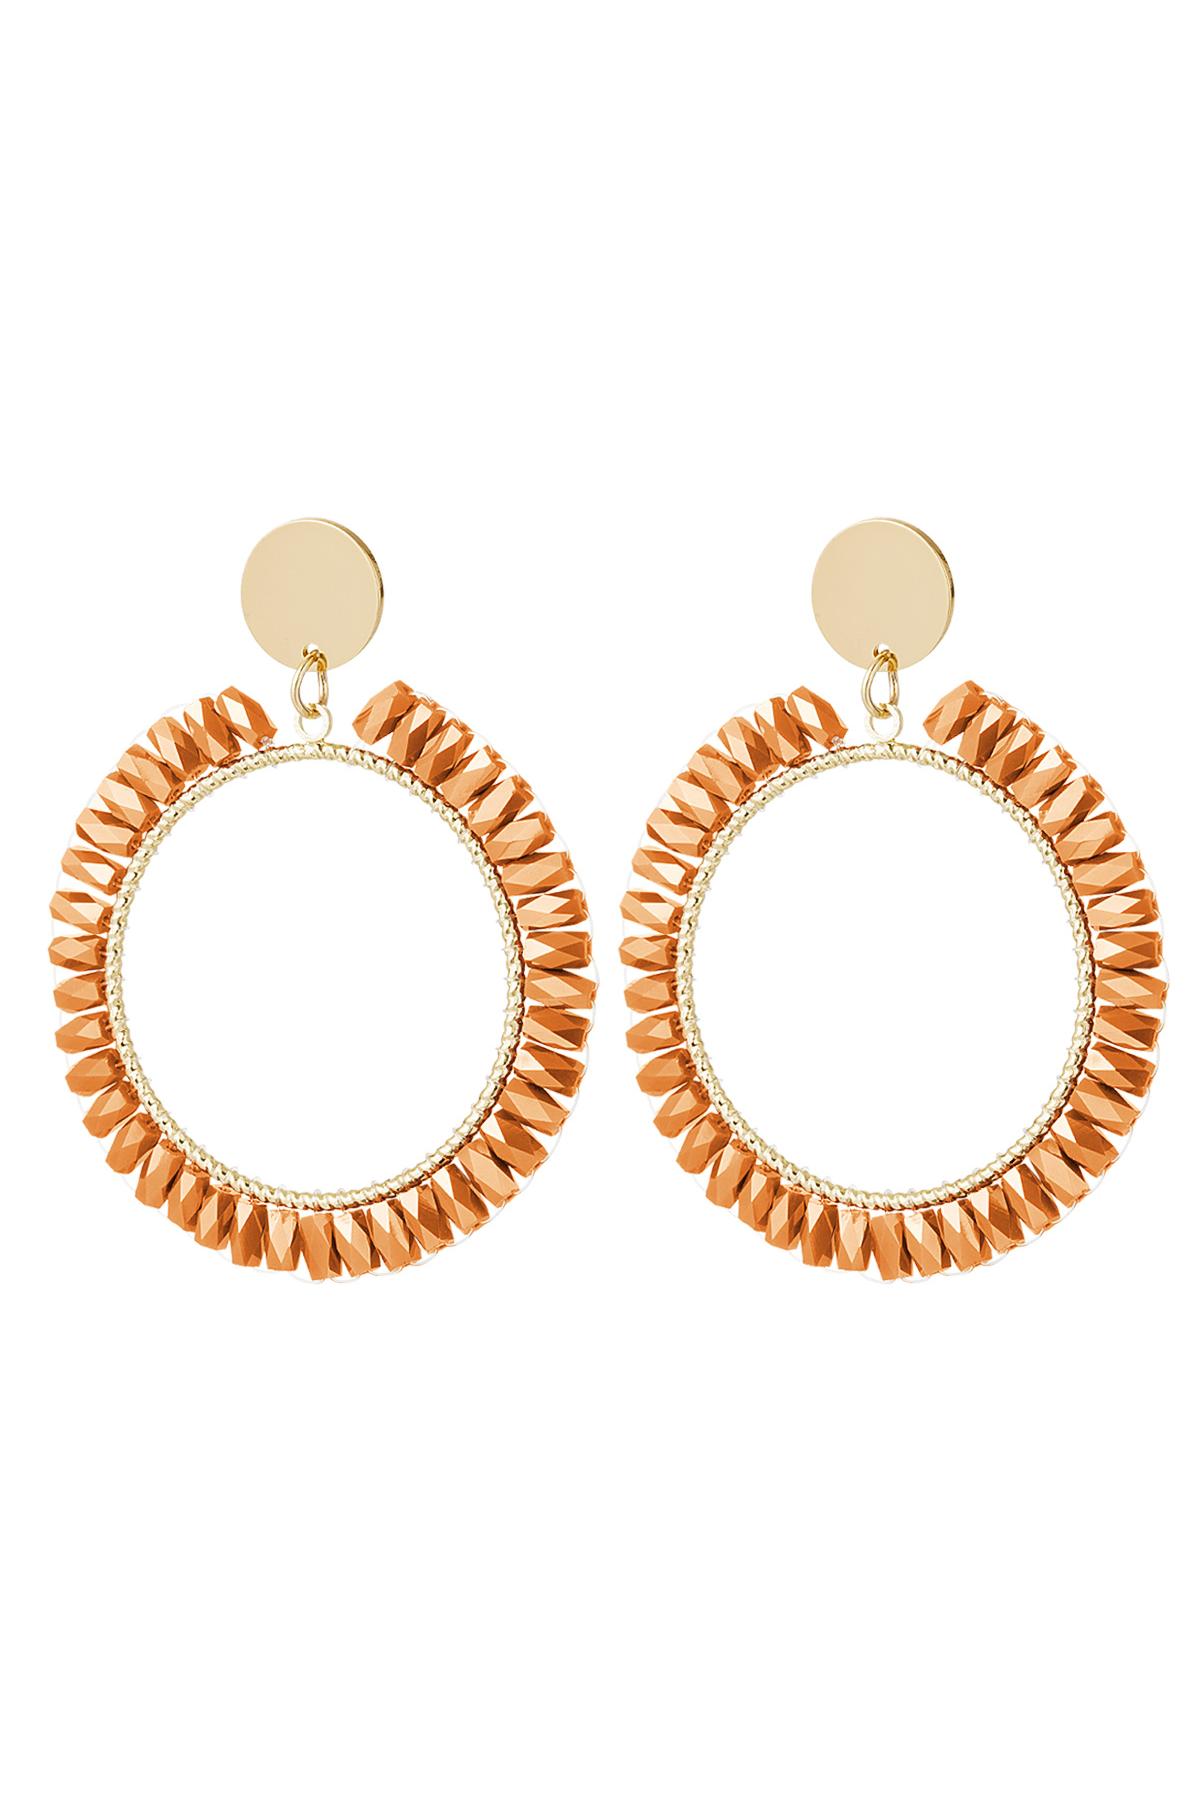 Earrings chic with crystal details Orange & Gold Copper 